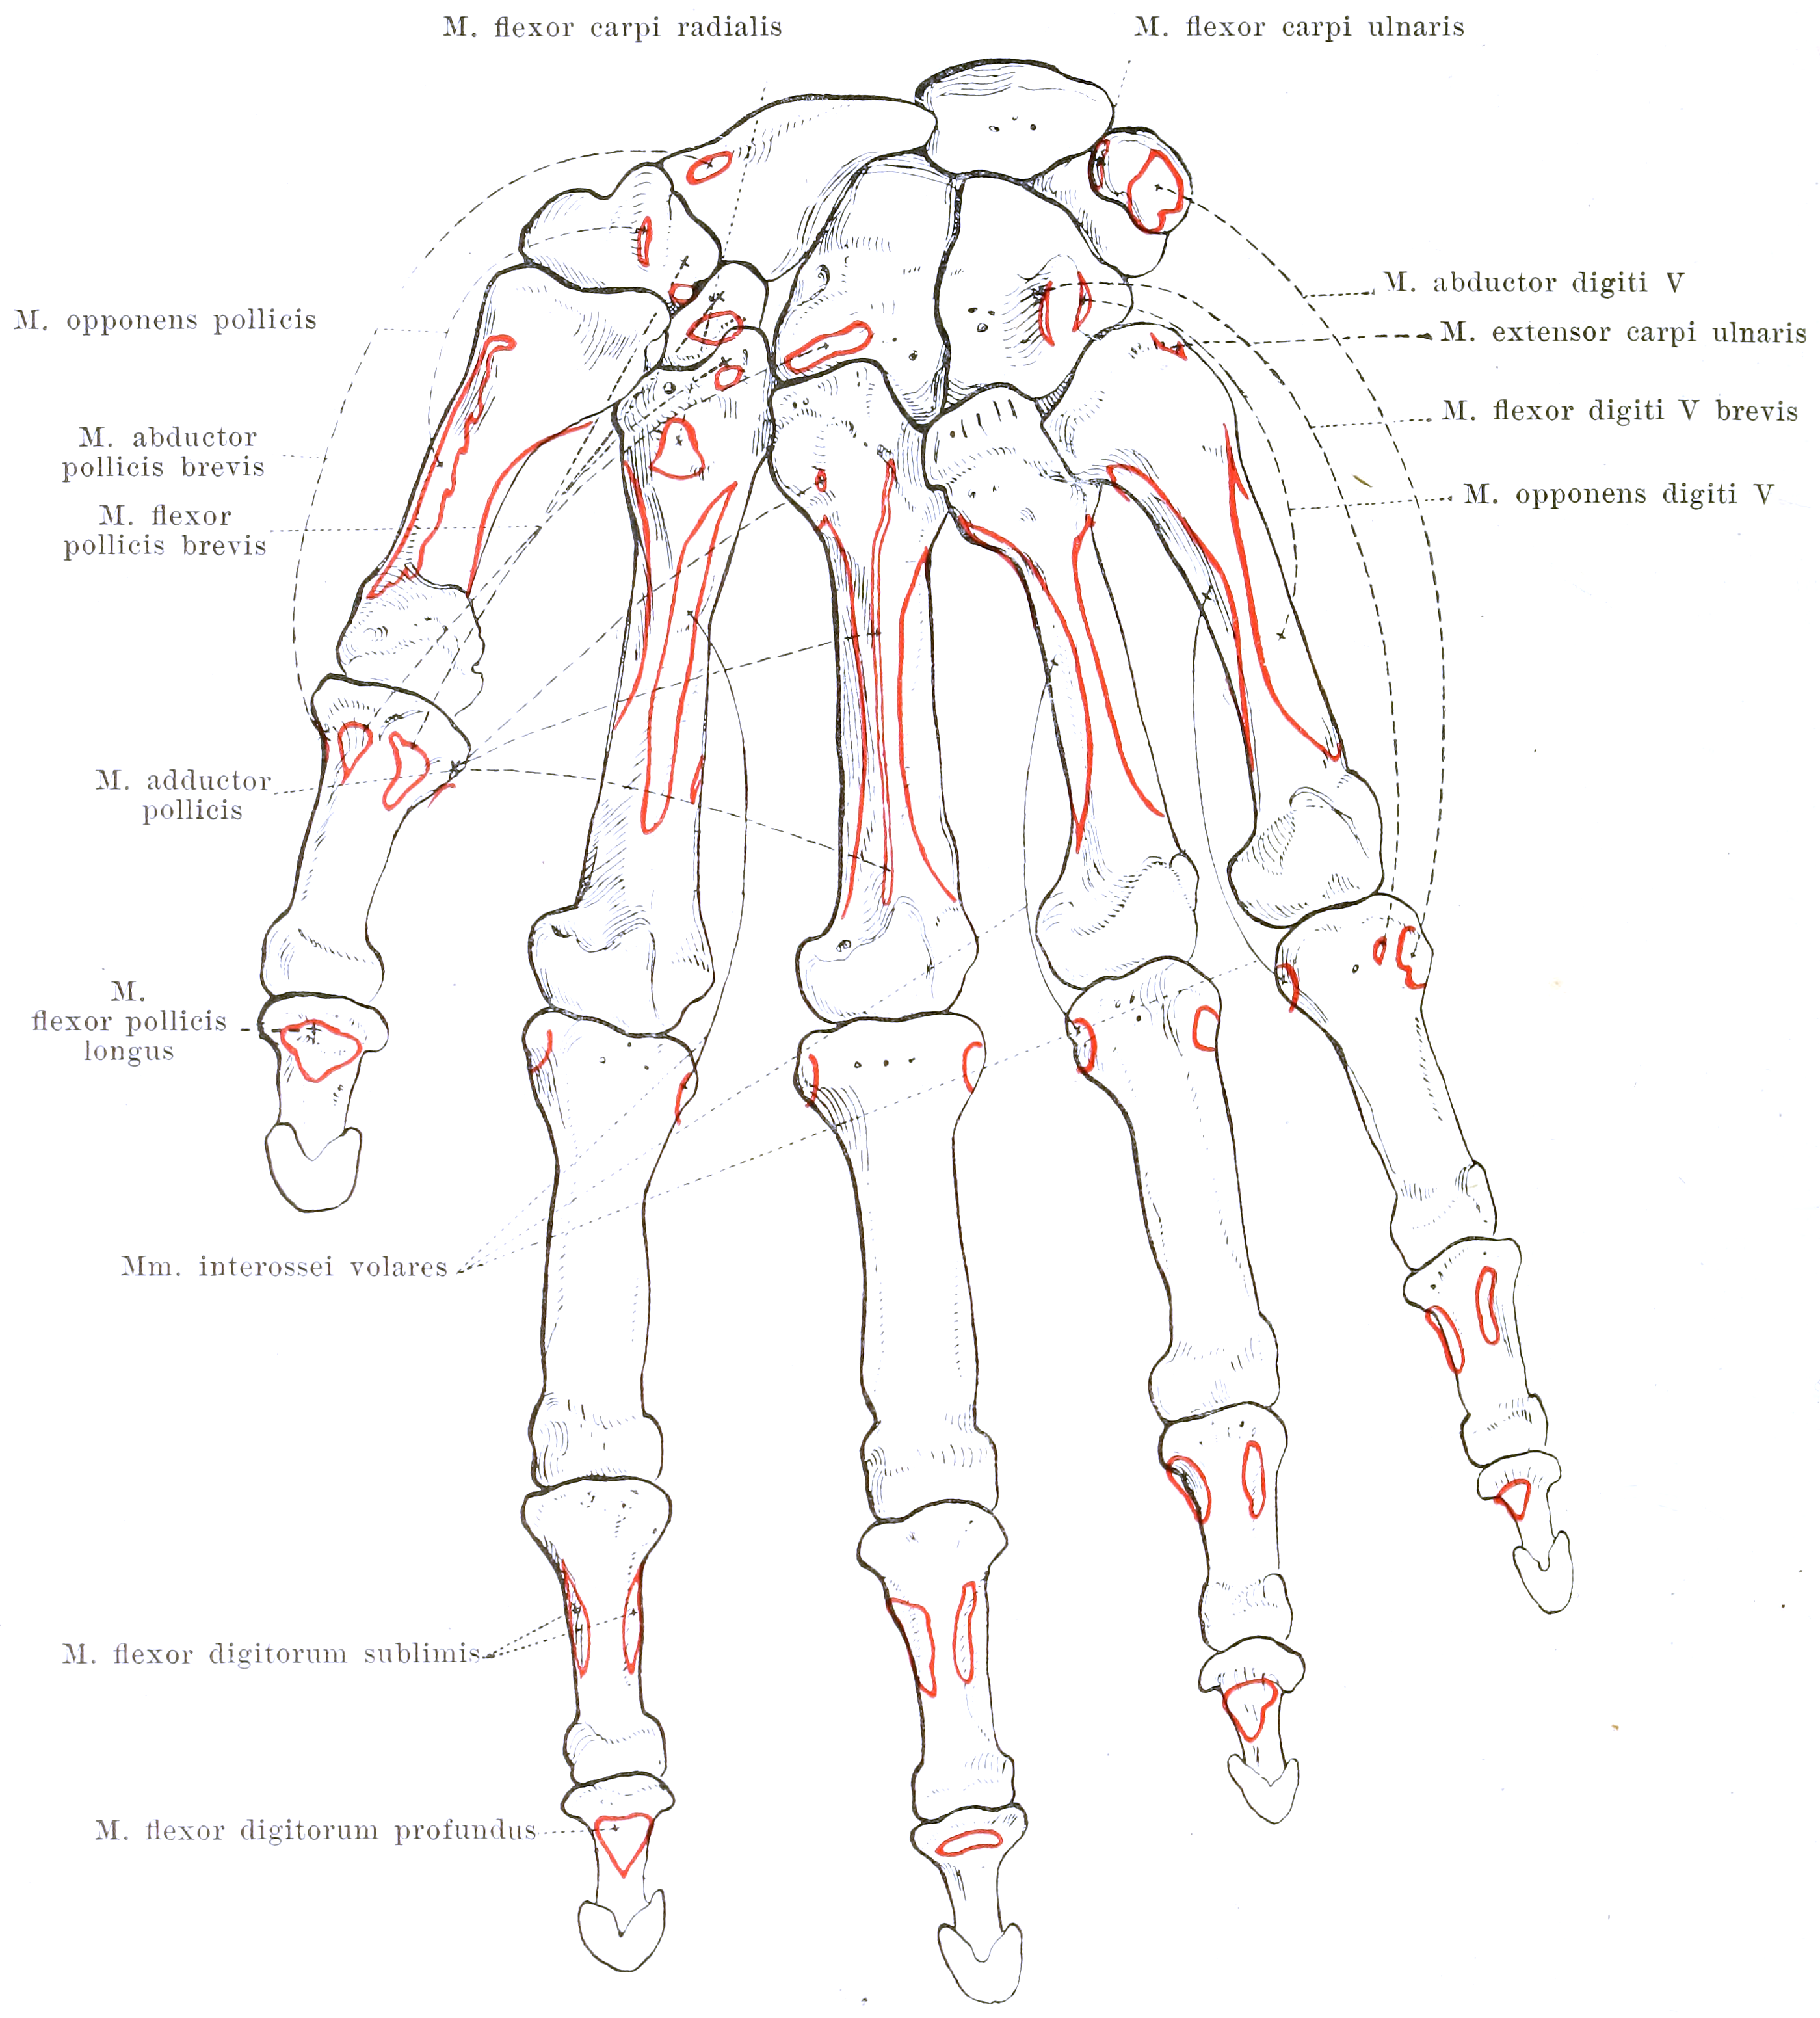 File:Spalteholz's Hand-Atlas of Human Anatomy (1906) - - Fig 150.png Wikimedia